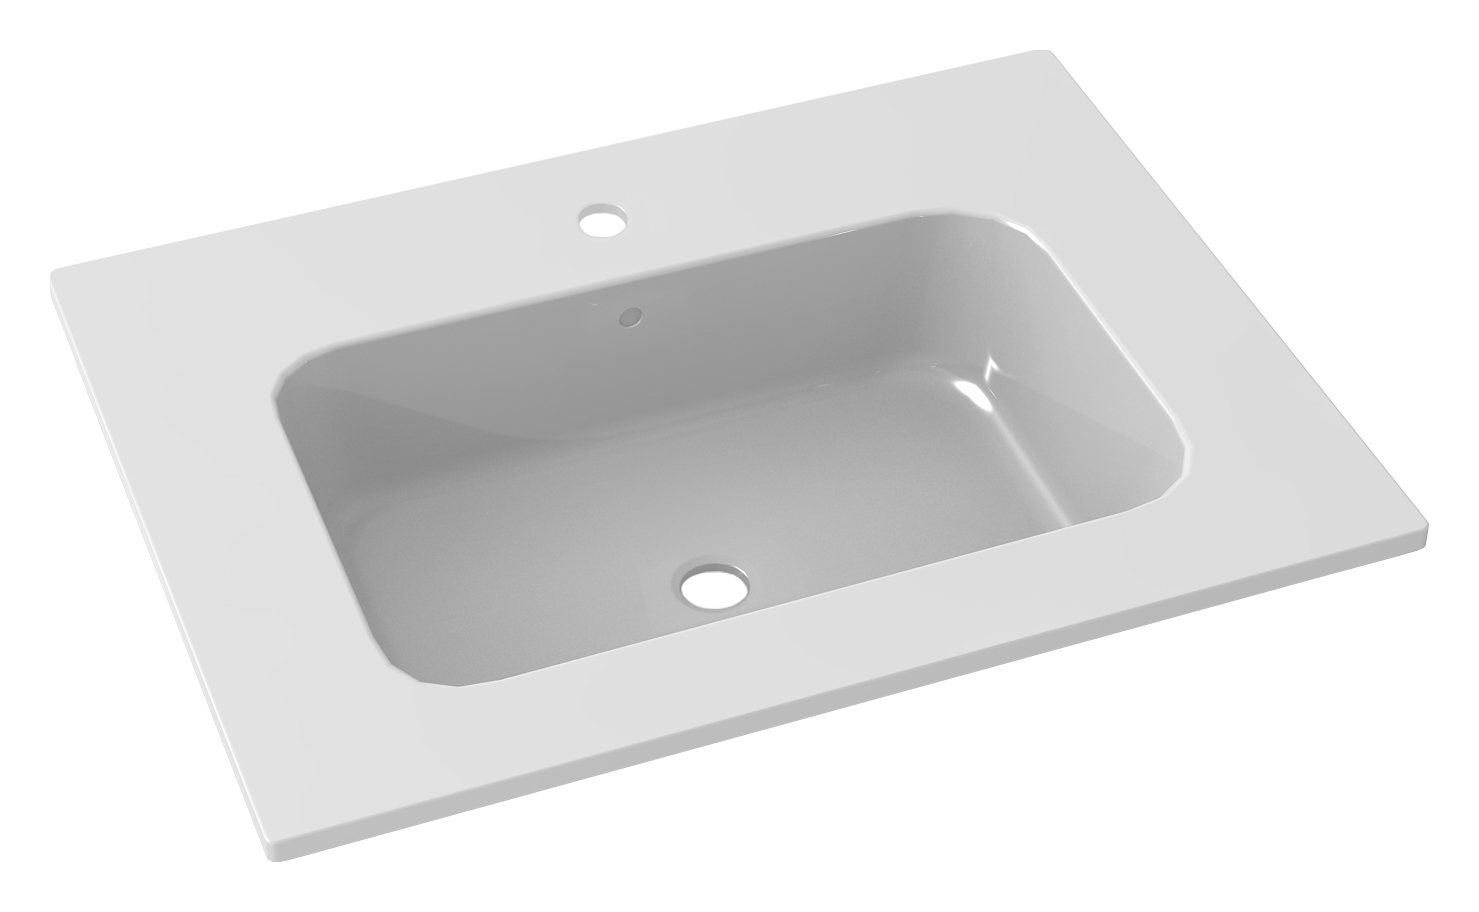 Image of Duarti By Calypso Twyford Cast Marble Vanity Basin - 610 x 405mm